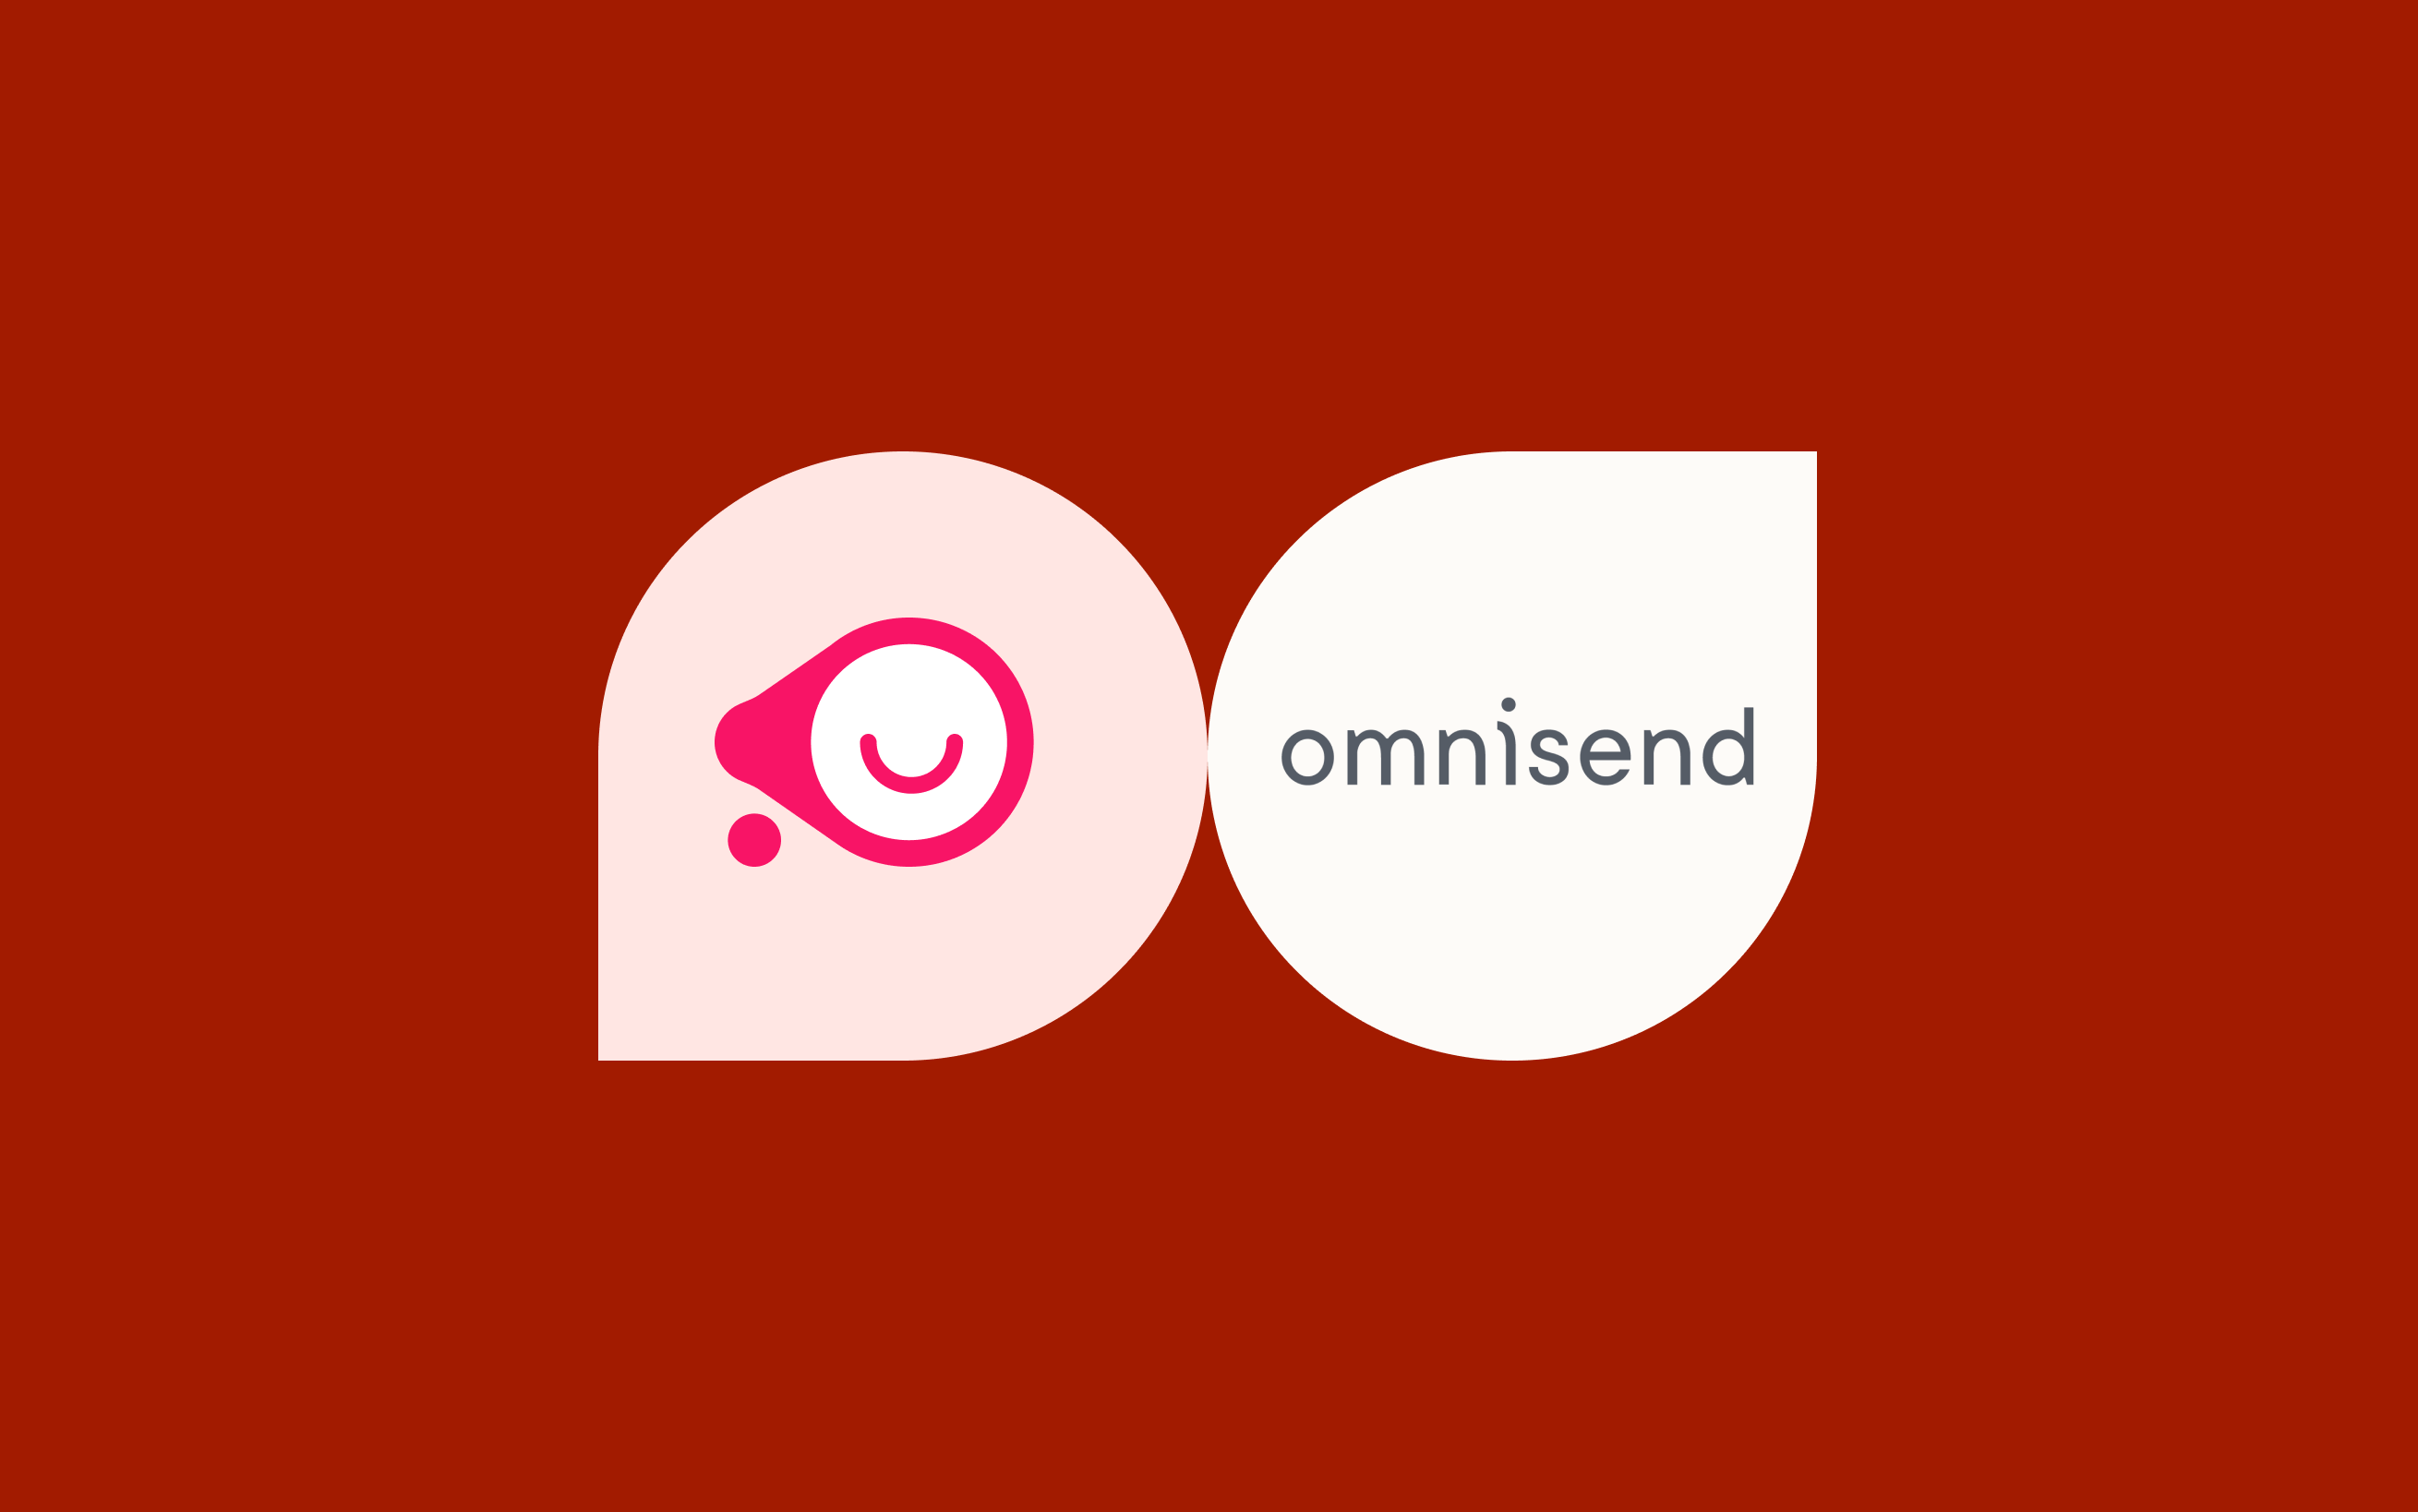 Email marketing solutions head-to-head: Automizely Marketing vs. Omnisend